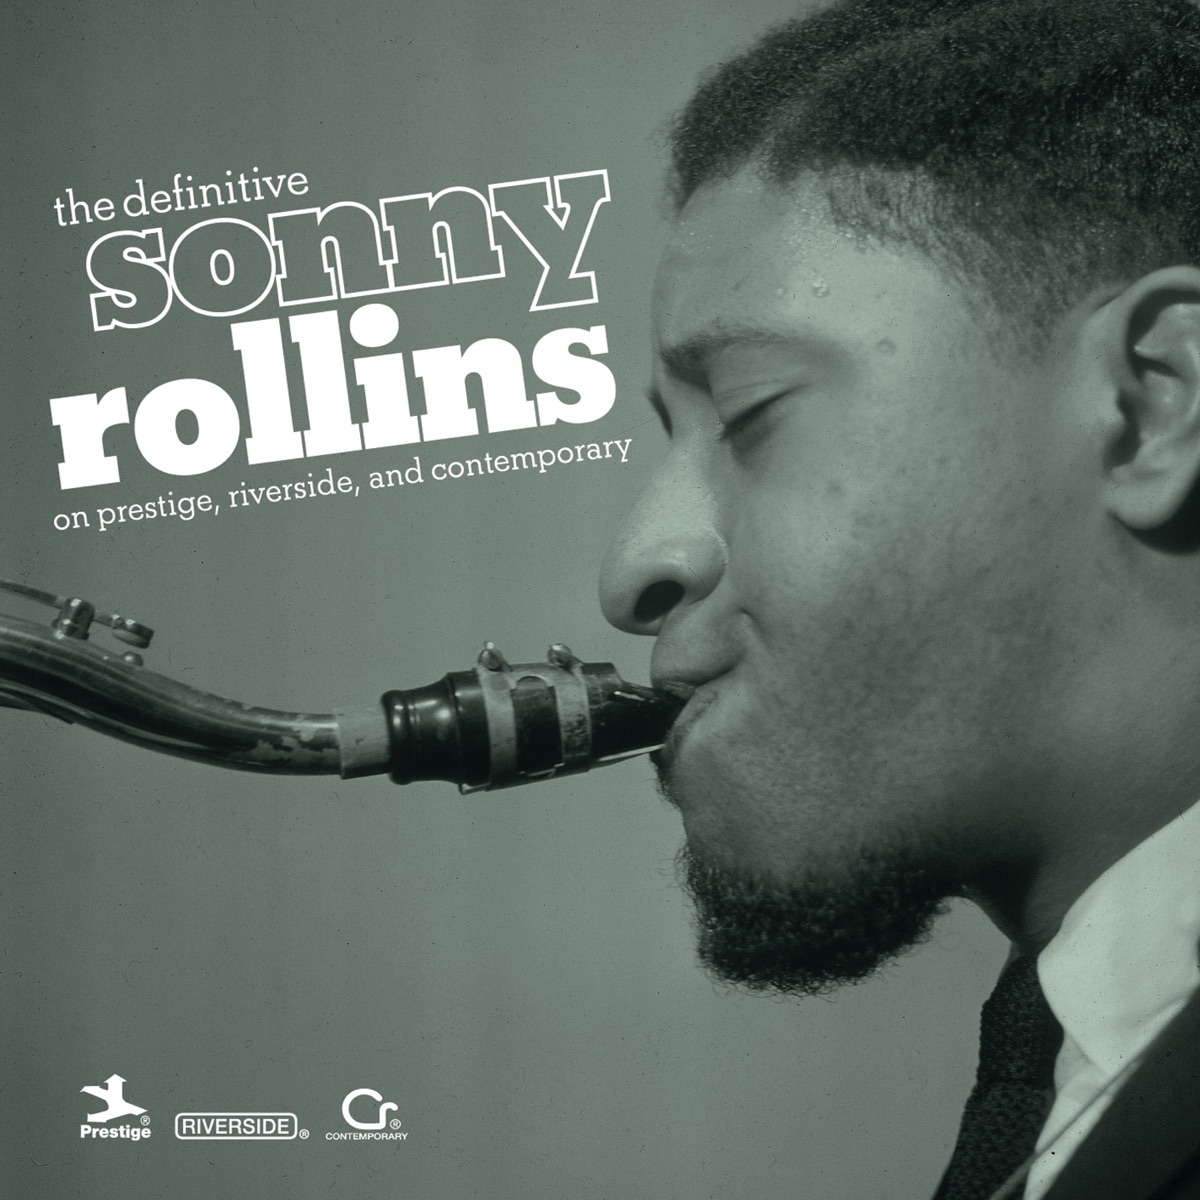 Saxophone Colossus (Reissue) by Sonny Rollins on Apple Music